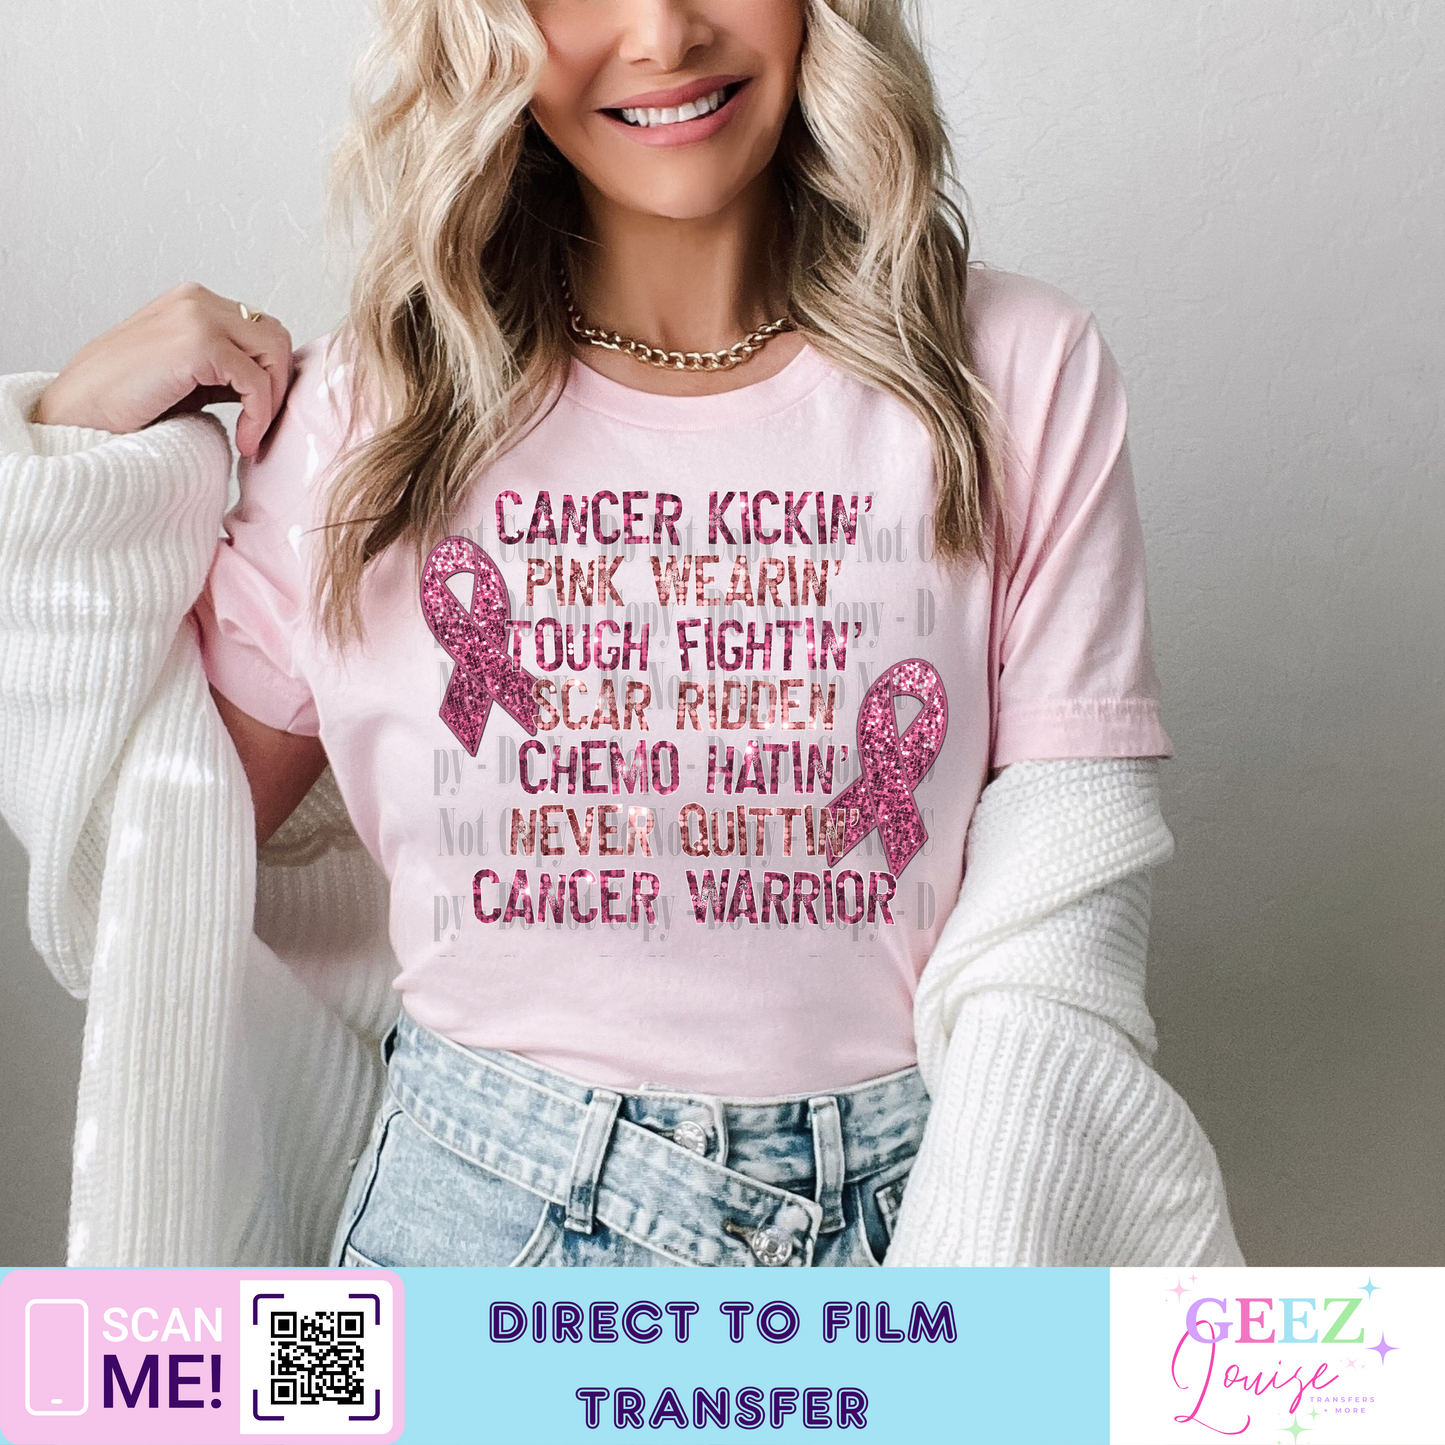 fight like a Cancer warrior - Direct to Film Transfer - made to order